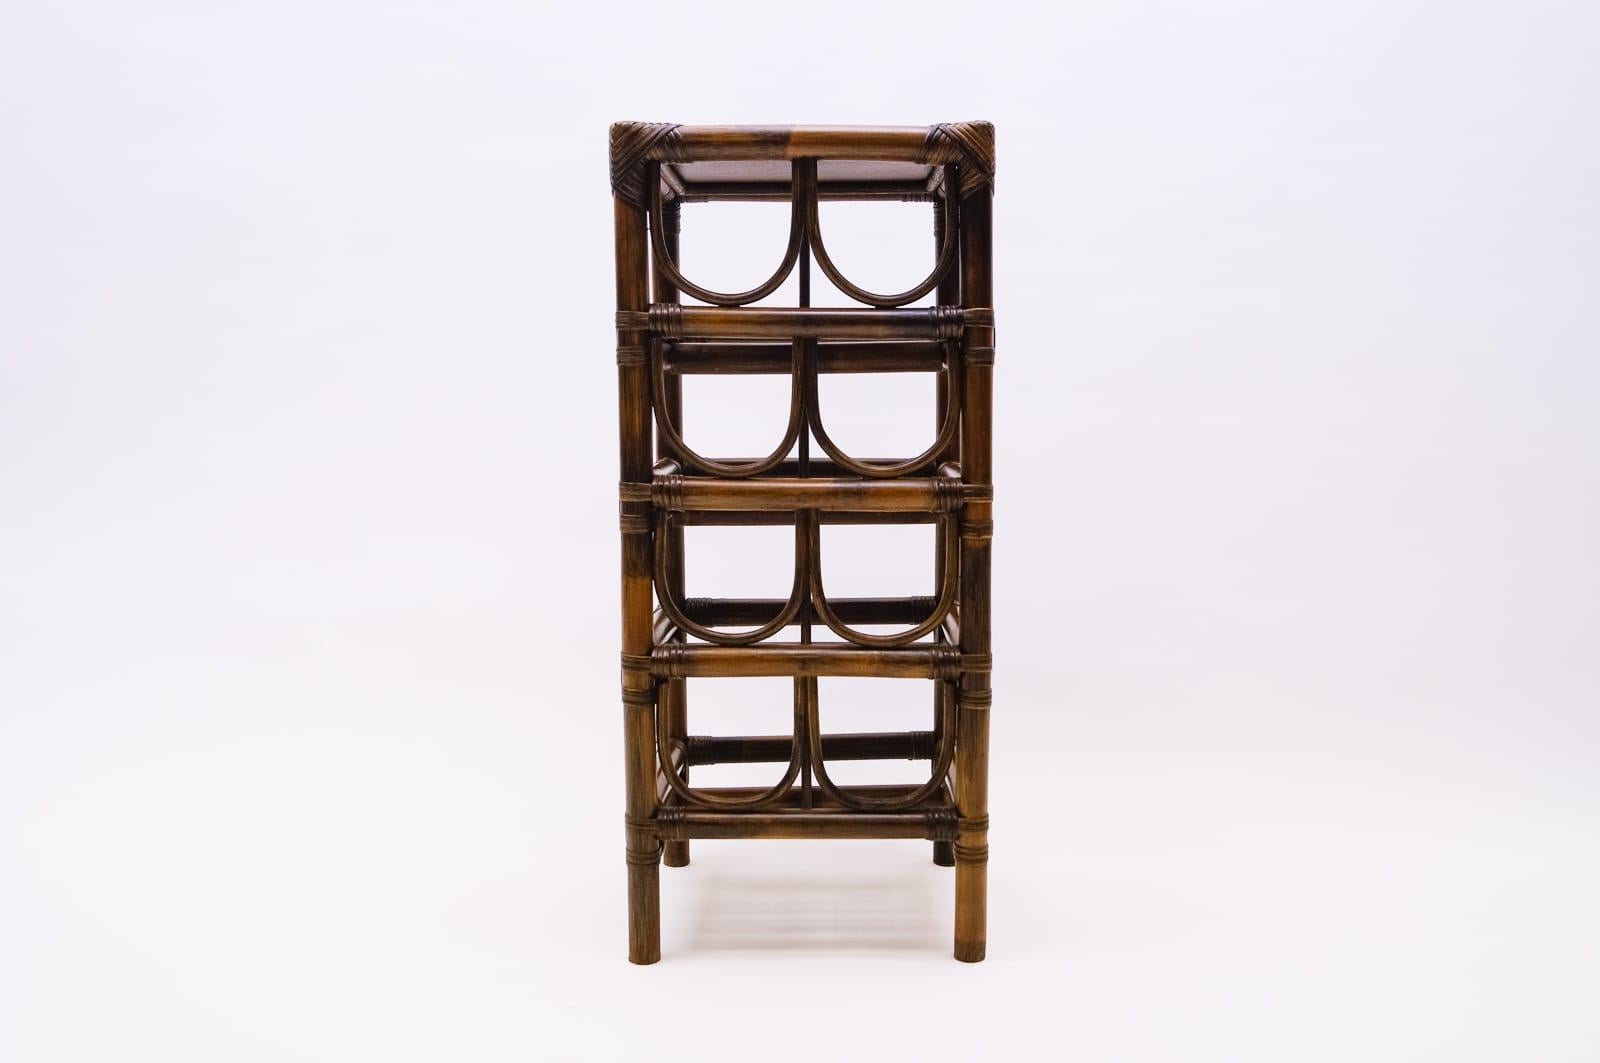 Elegant French bamboo and rattan wine rack for eight bottles with shelf

Very good condition, the decorative sheathing is missing on the right side. Hardly noticeable.